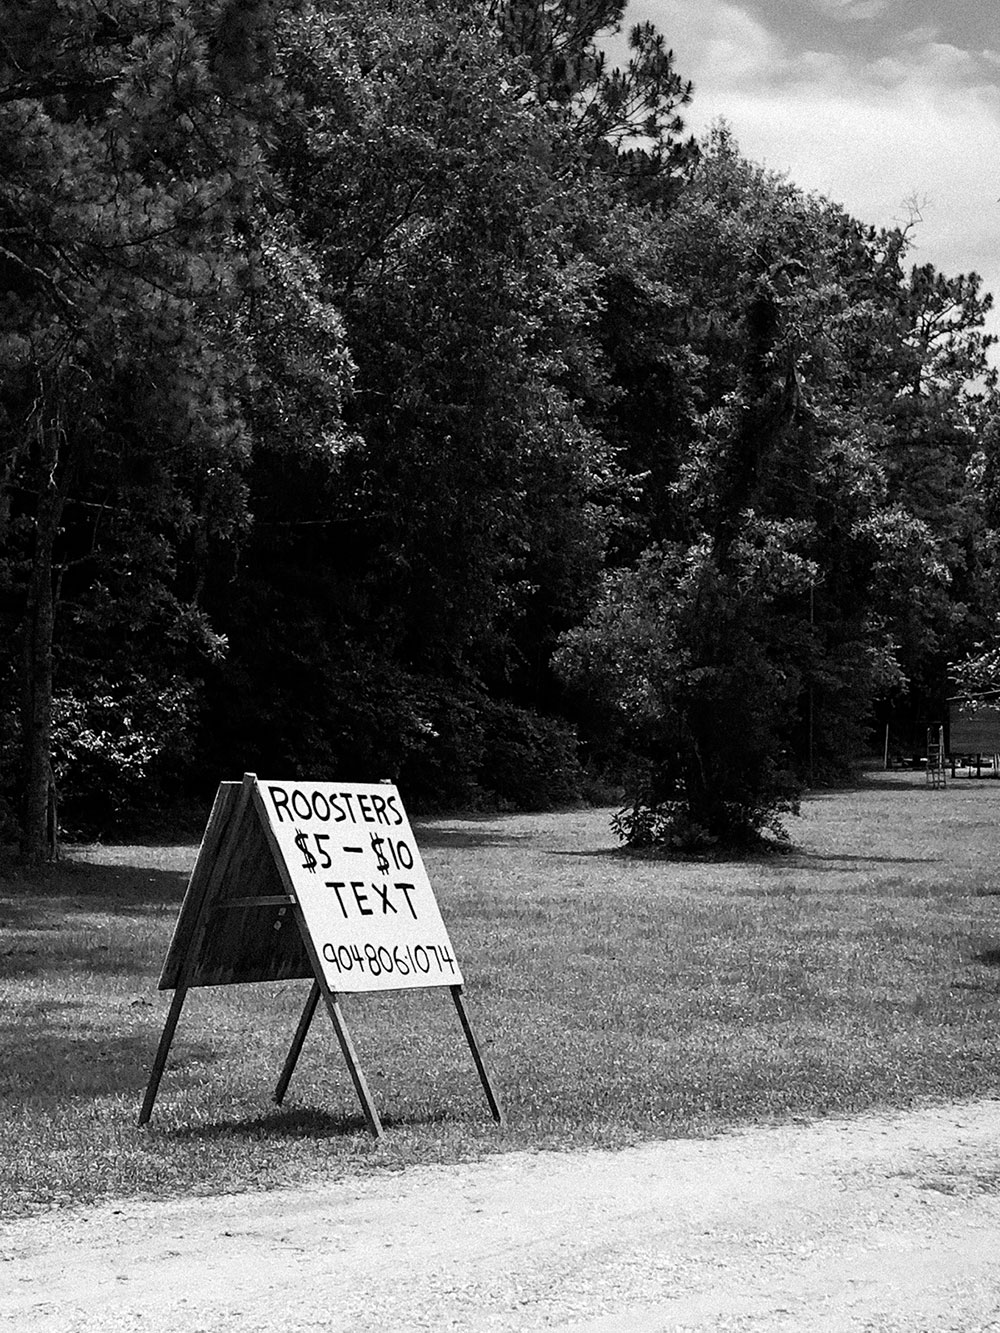 black and white photograph by Gunner Hughes of a sale sign that reads rooster $5 to $10 and a number to text